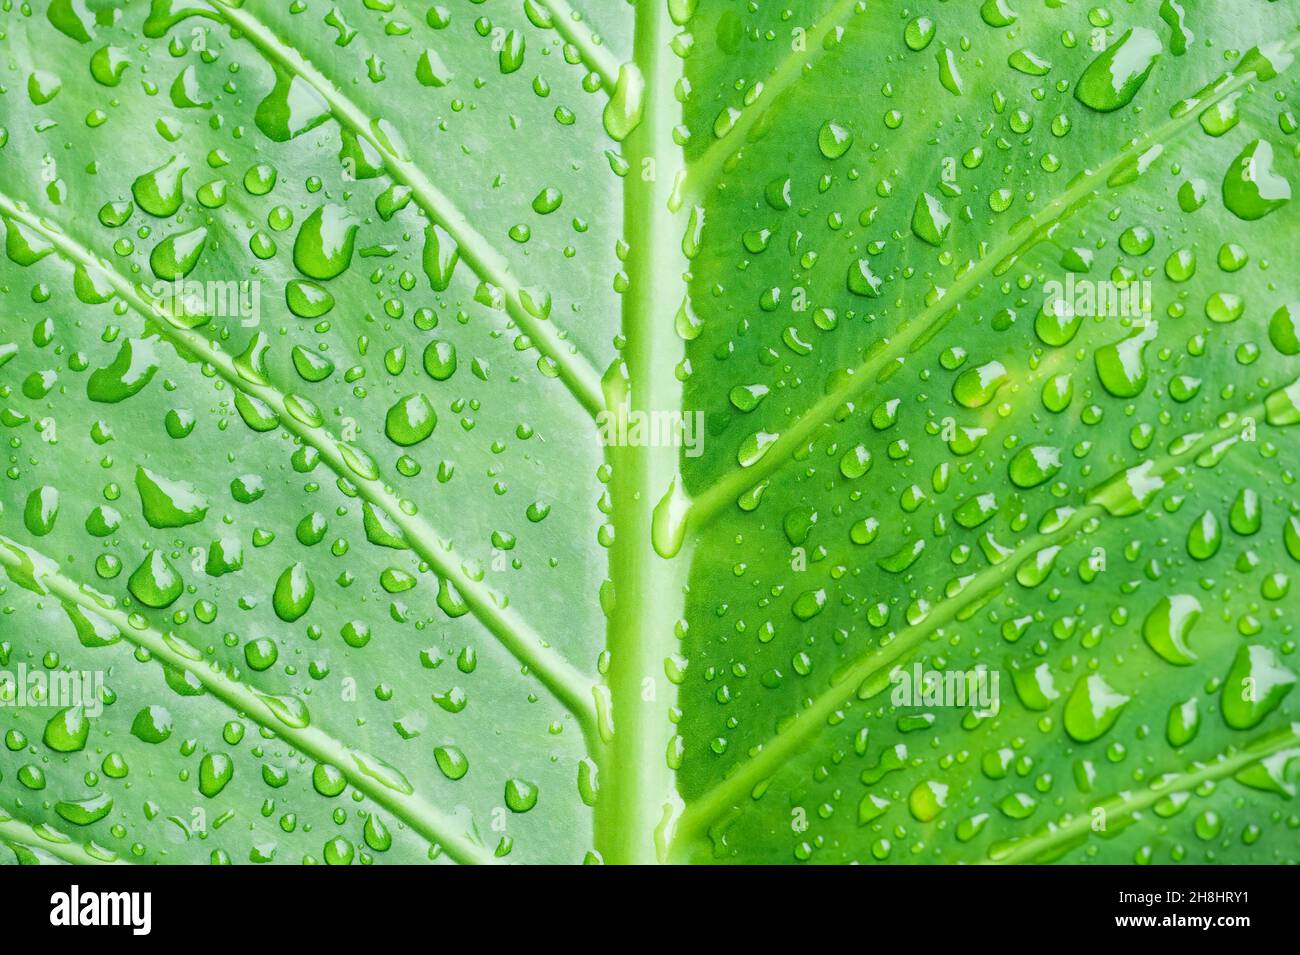 Close-up of leaf with water droplets Stock Photo